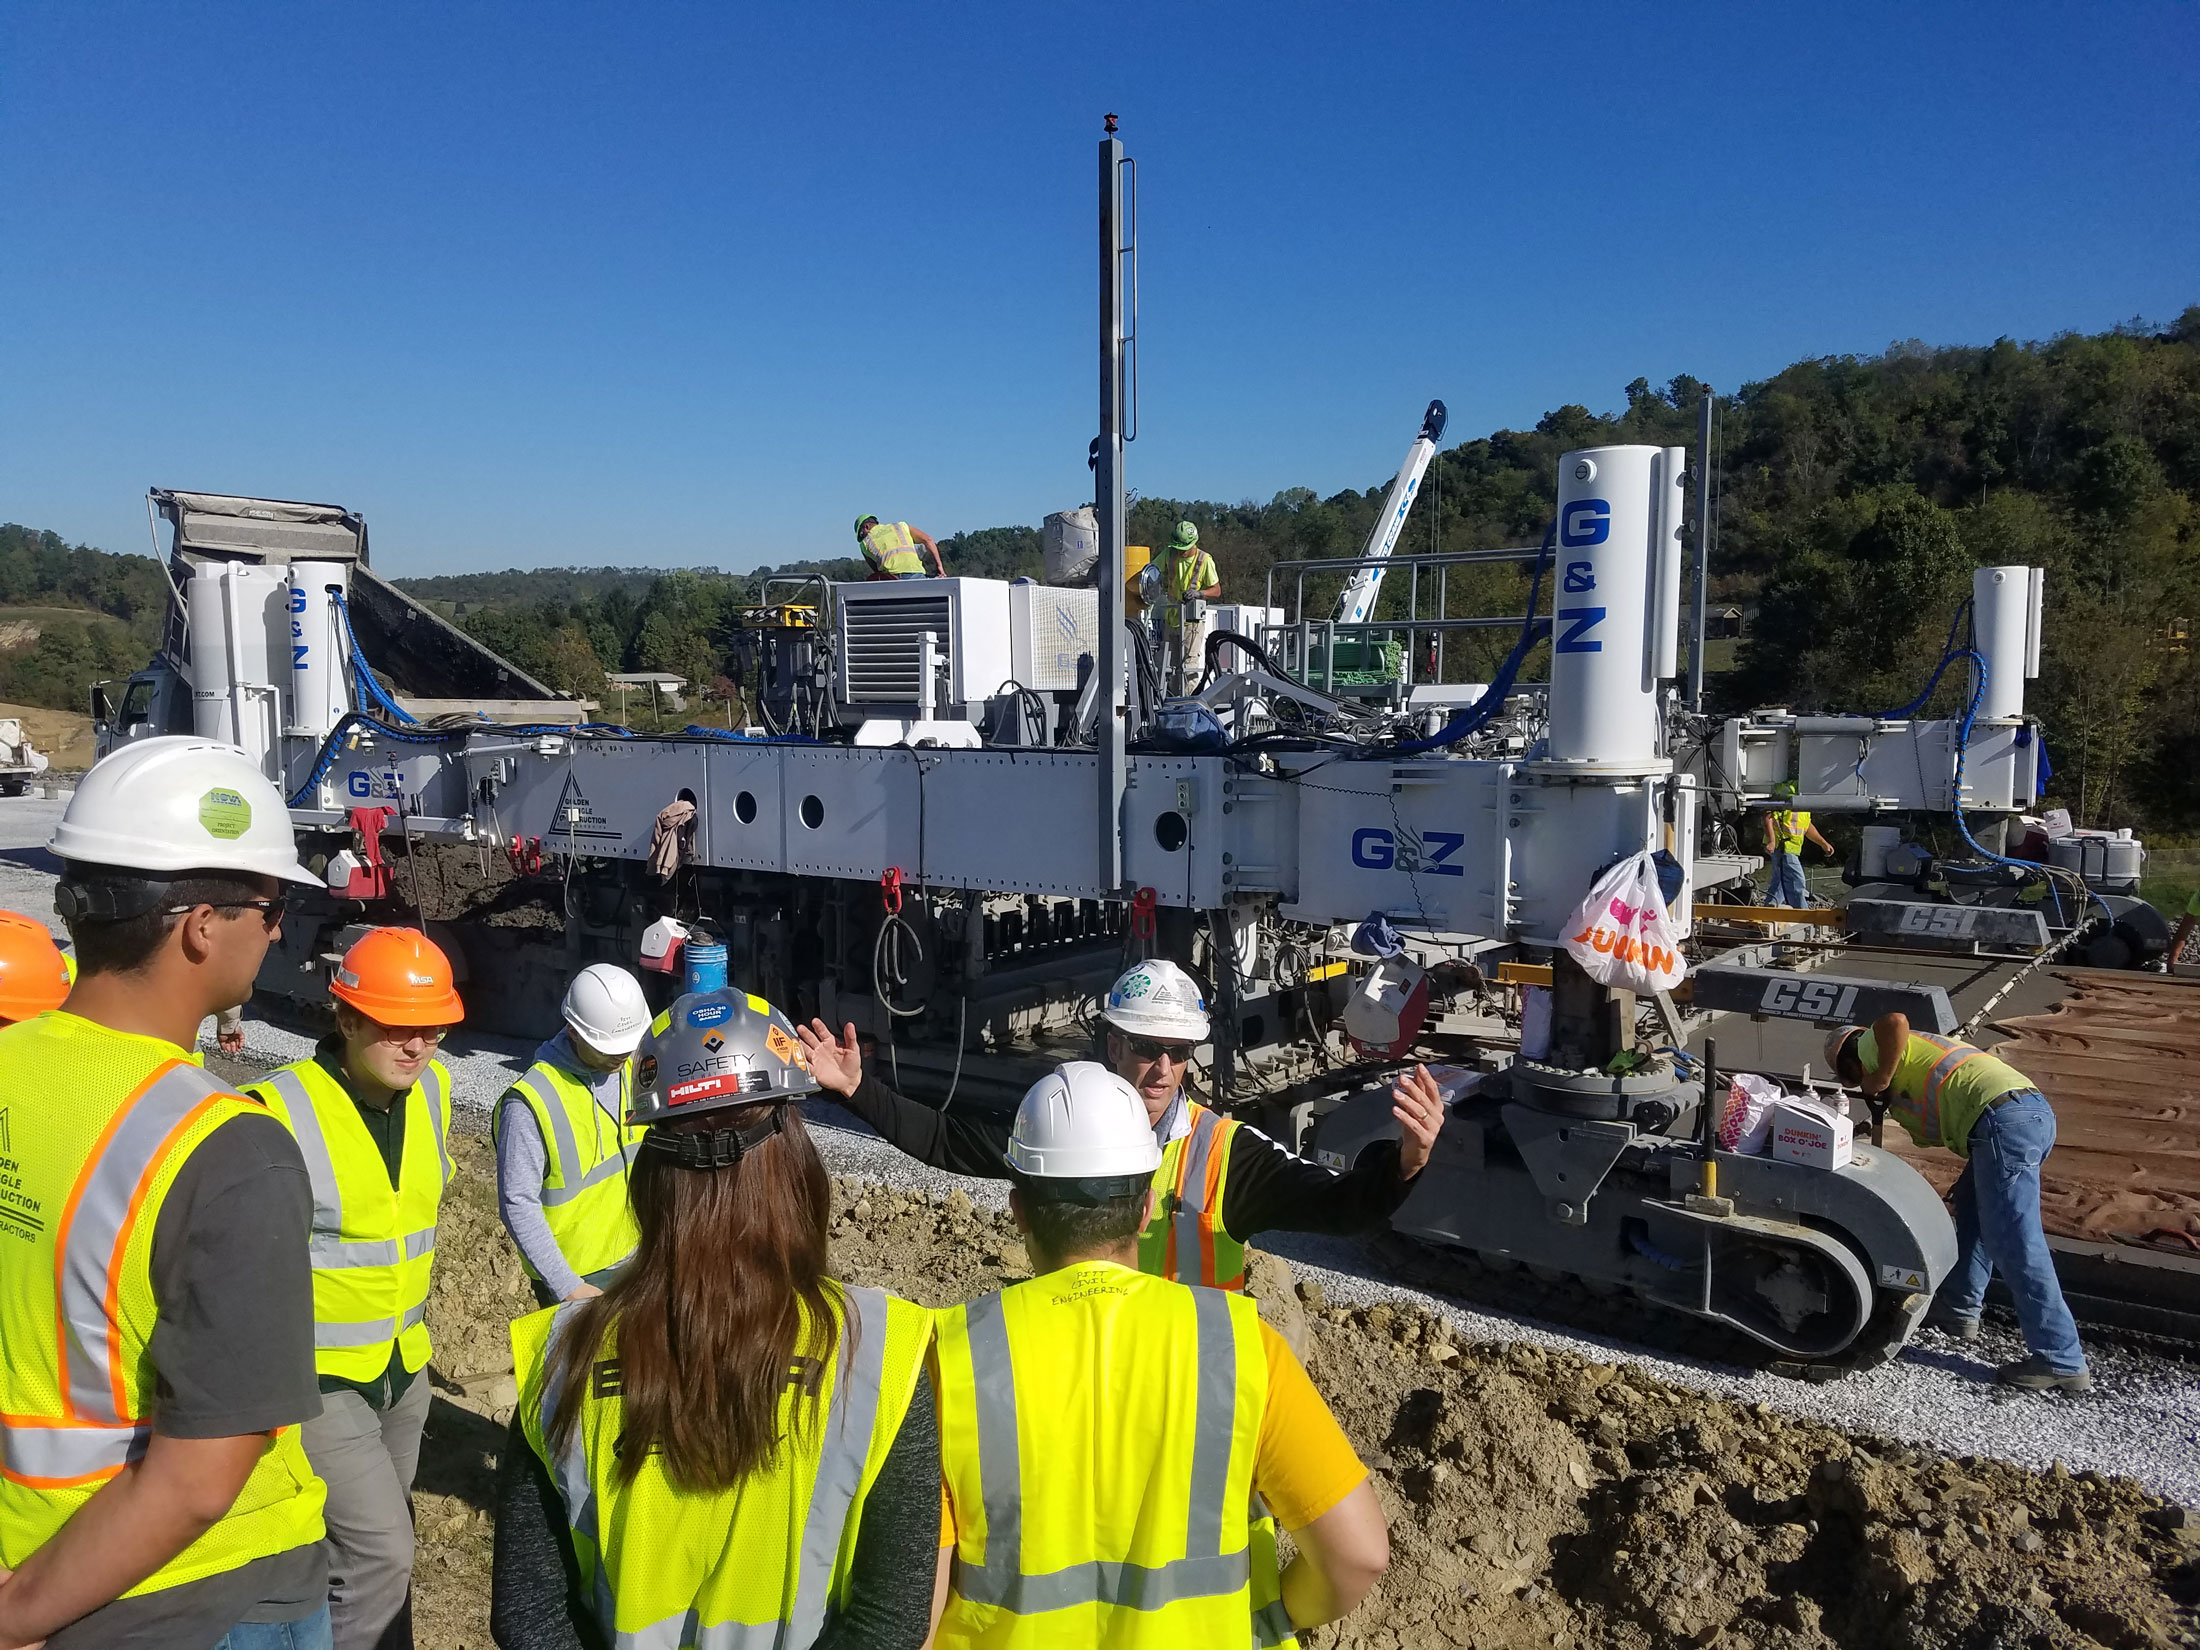 September 27 2019: Southern Beltway Plant and Paving Tour